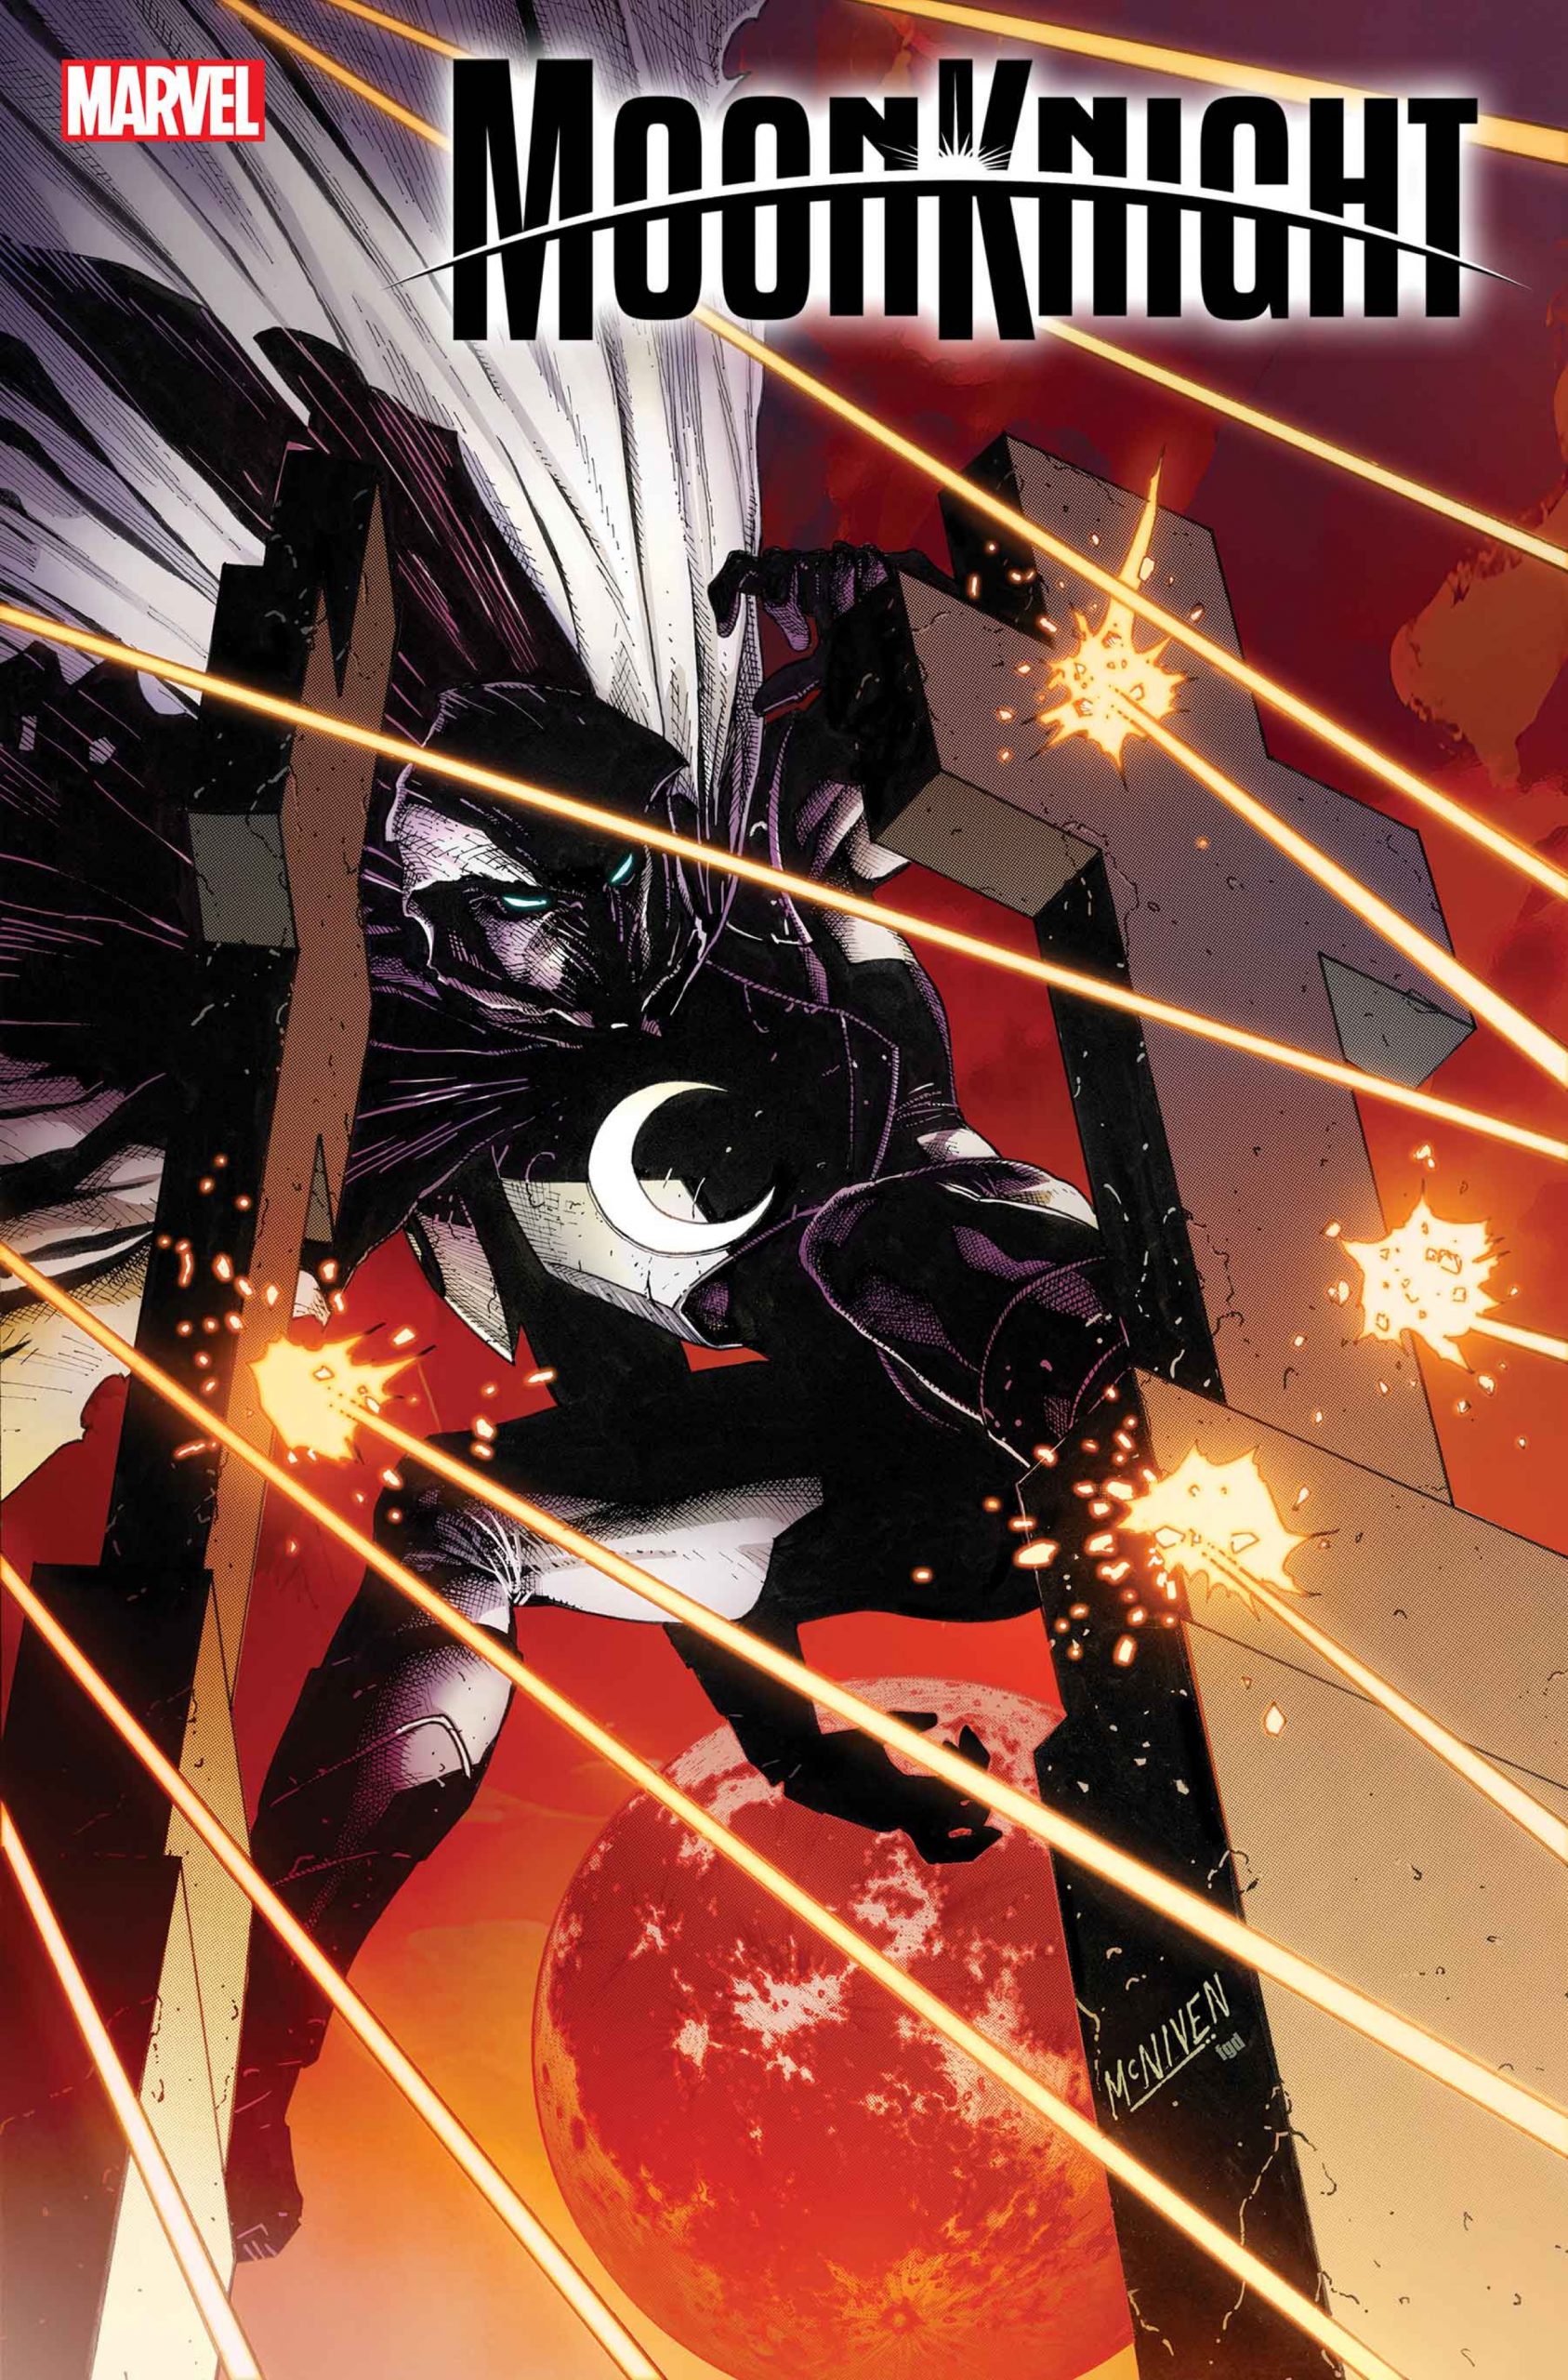 Marvel Preview: Moon Knight #25